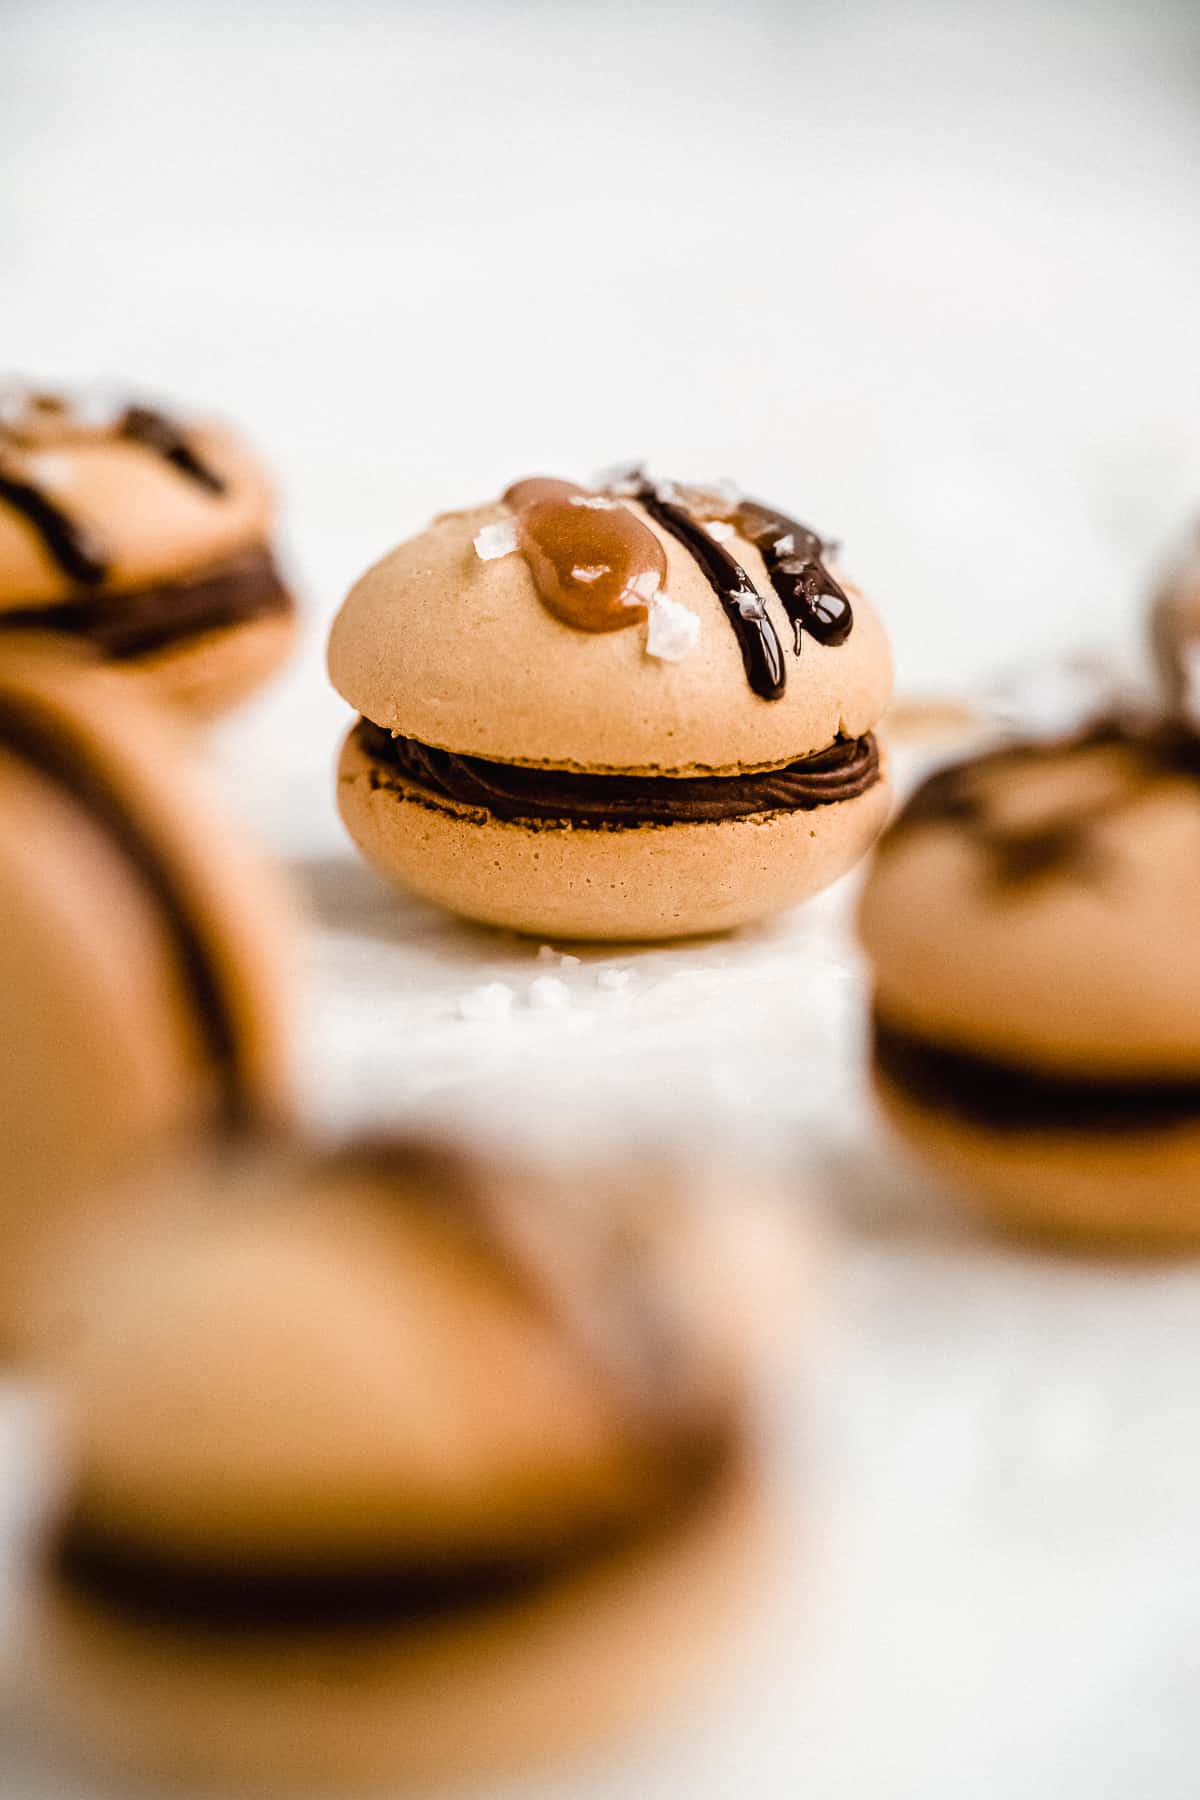 Close up photo from the side showing a delicious Dark Chocolate Caramel Dairy-free Macaron.  Several other macarons are in the background.  